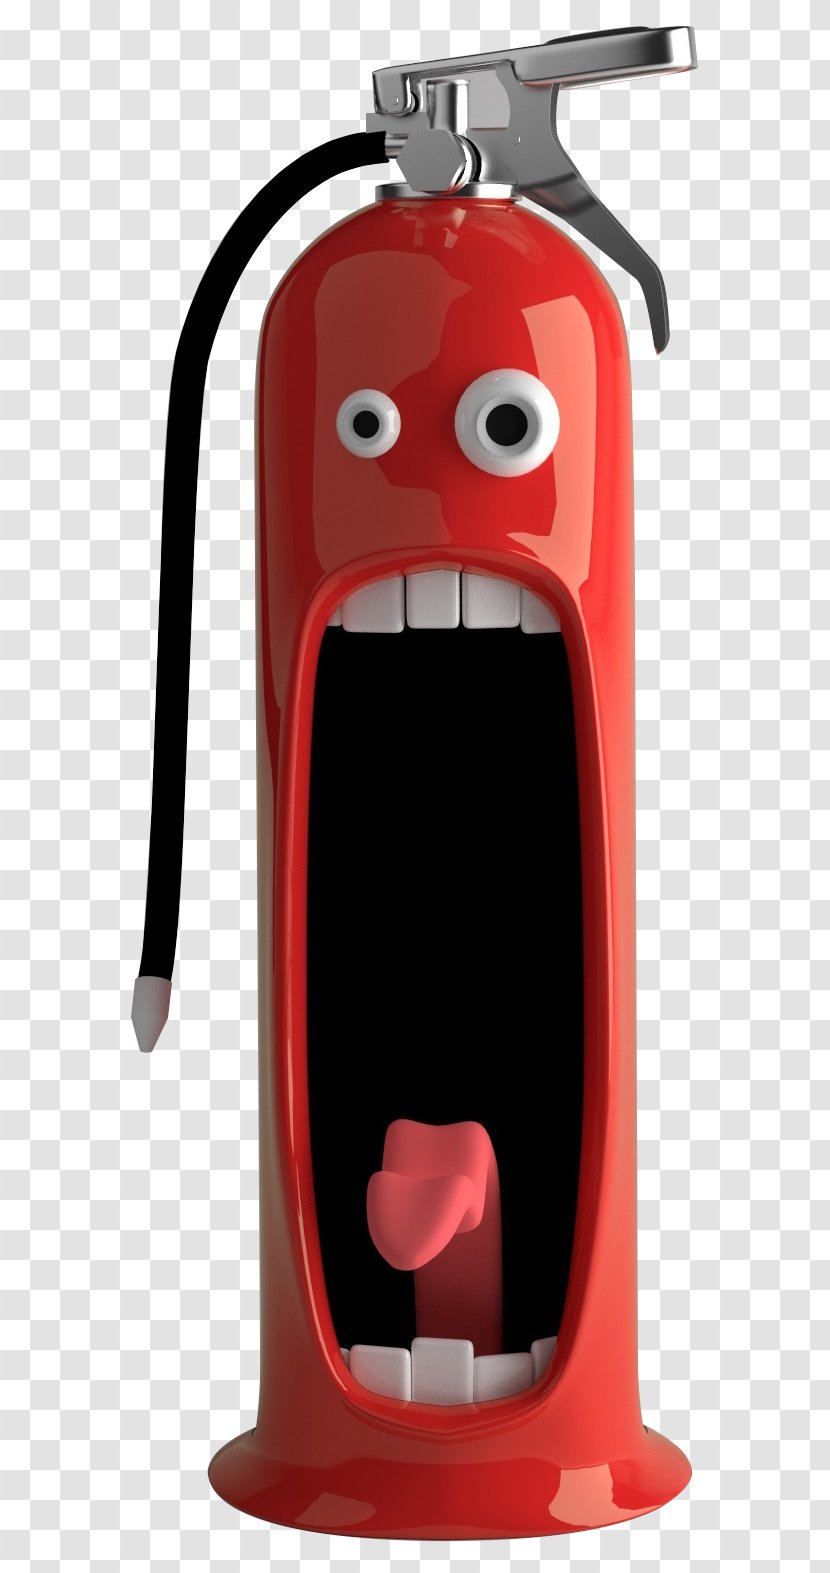 Terrified Expression Extinguisher - Product - Fire Alarm System Transparent PNG